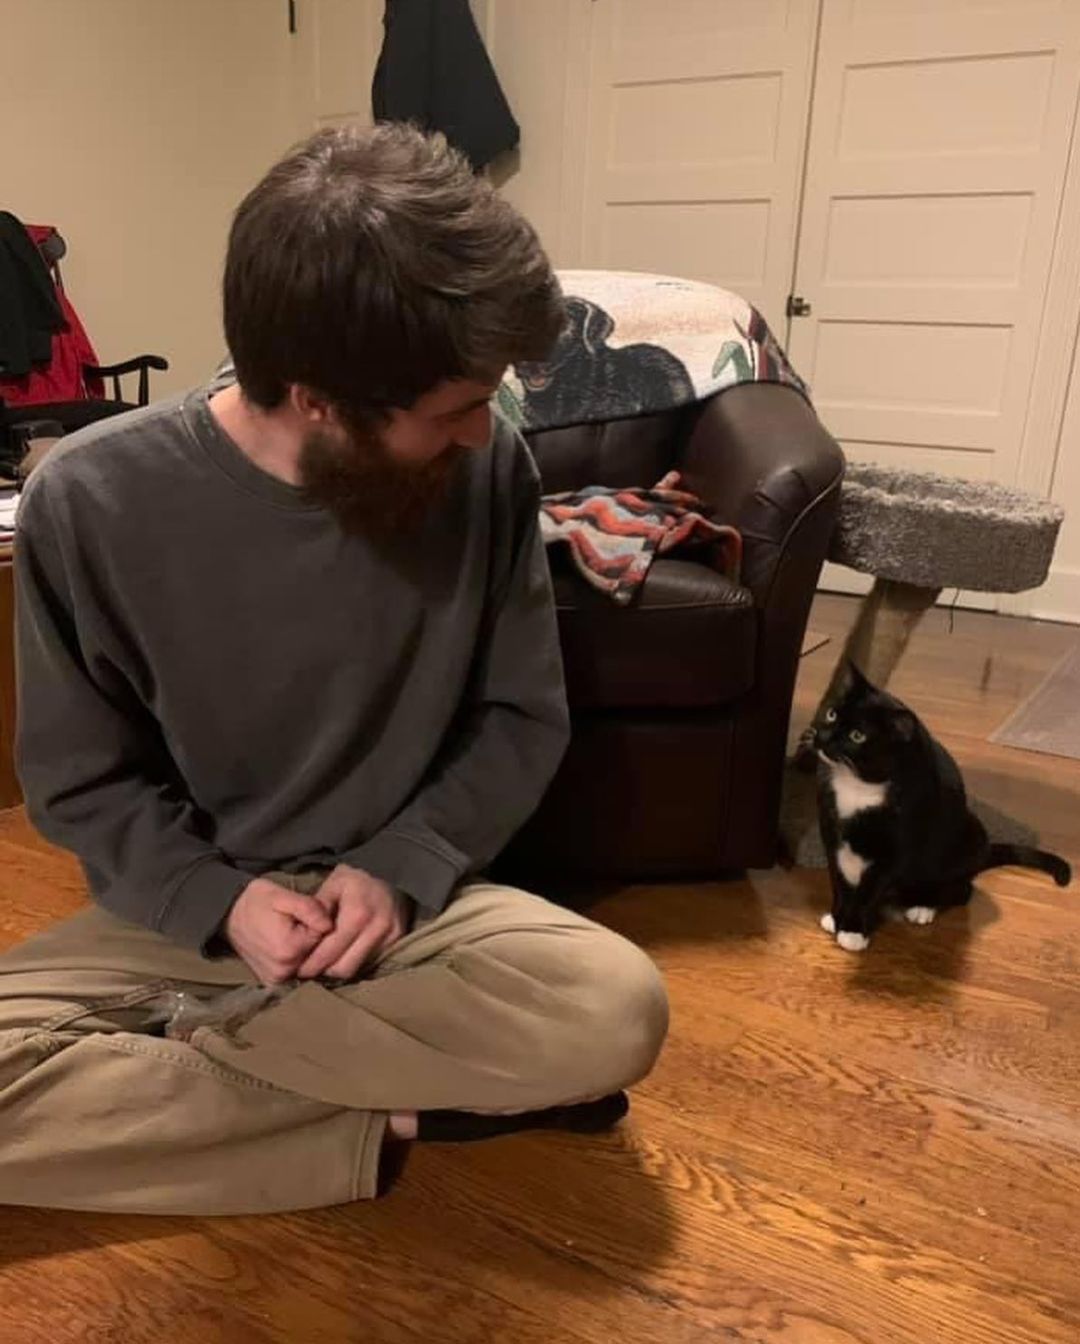 We are so excited that our older cat, Socks, found a home! Her new dad was friends with the foster, and got to know Socks over time, and decided to make her a permanent family member!

Thank you to Brittany for fostering Socks!